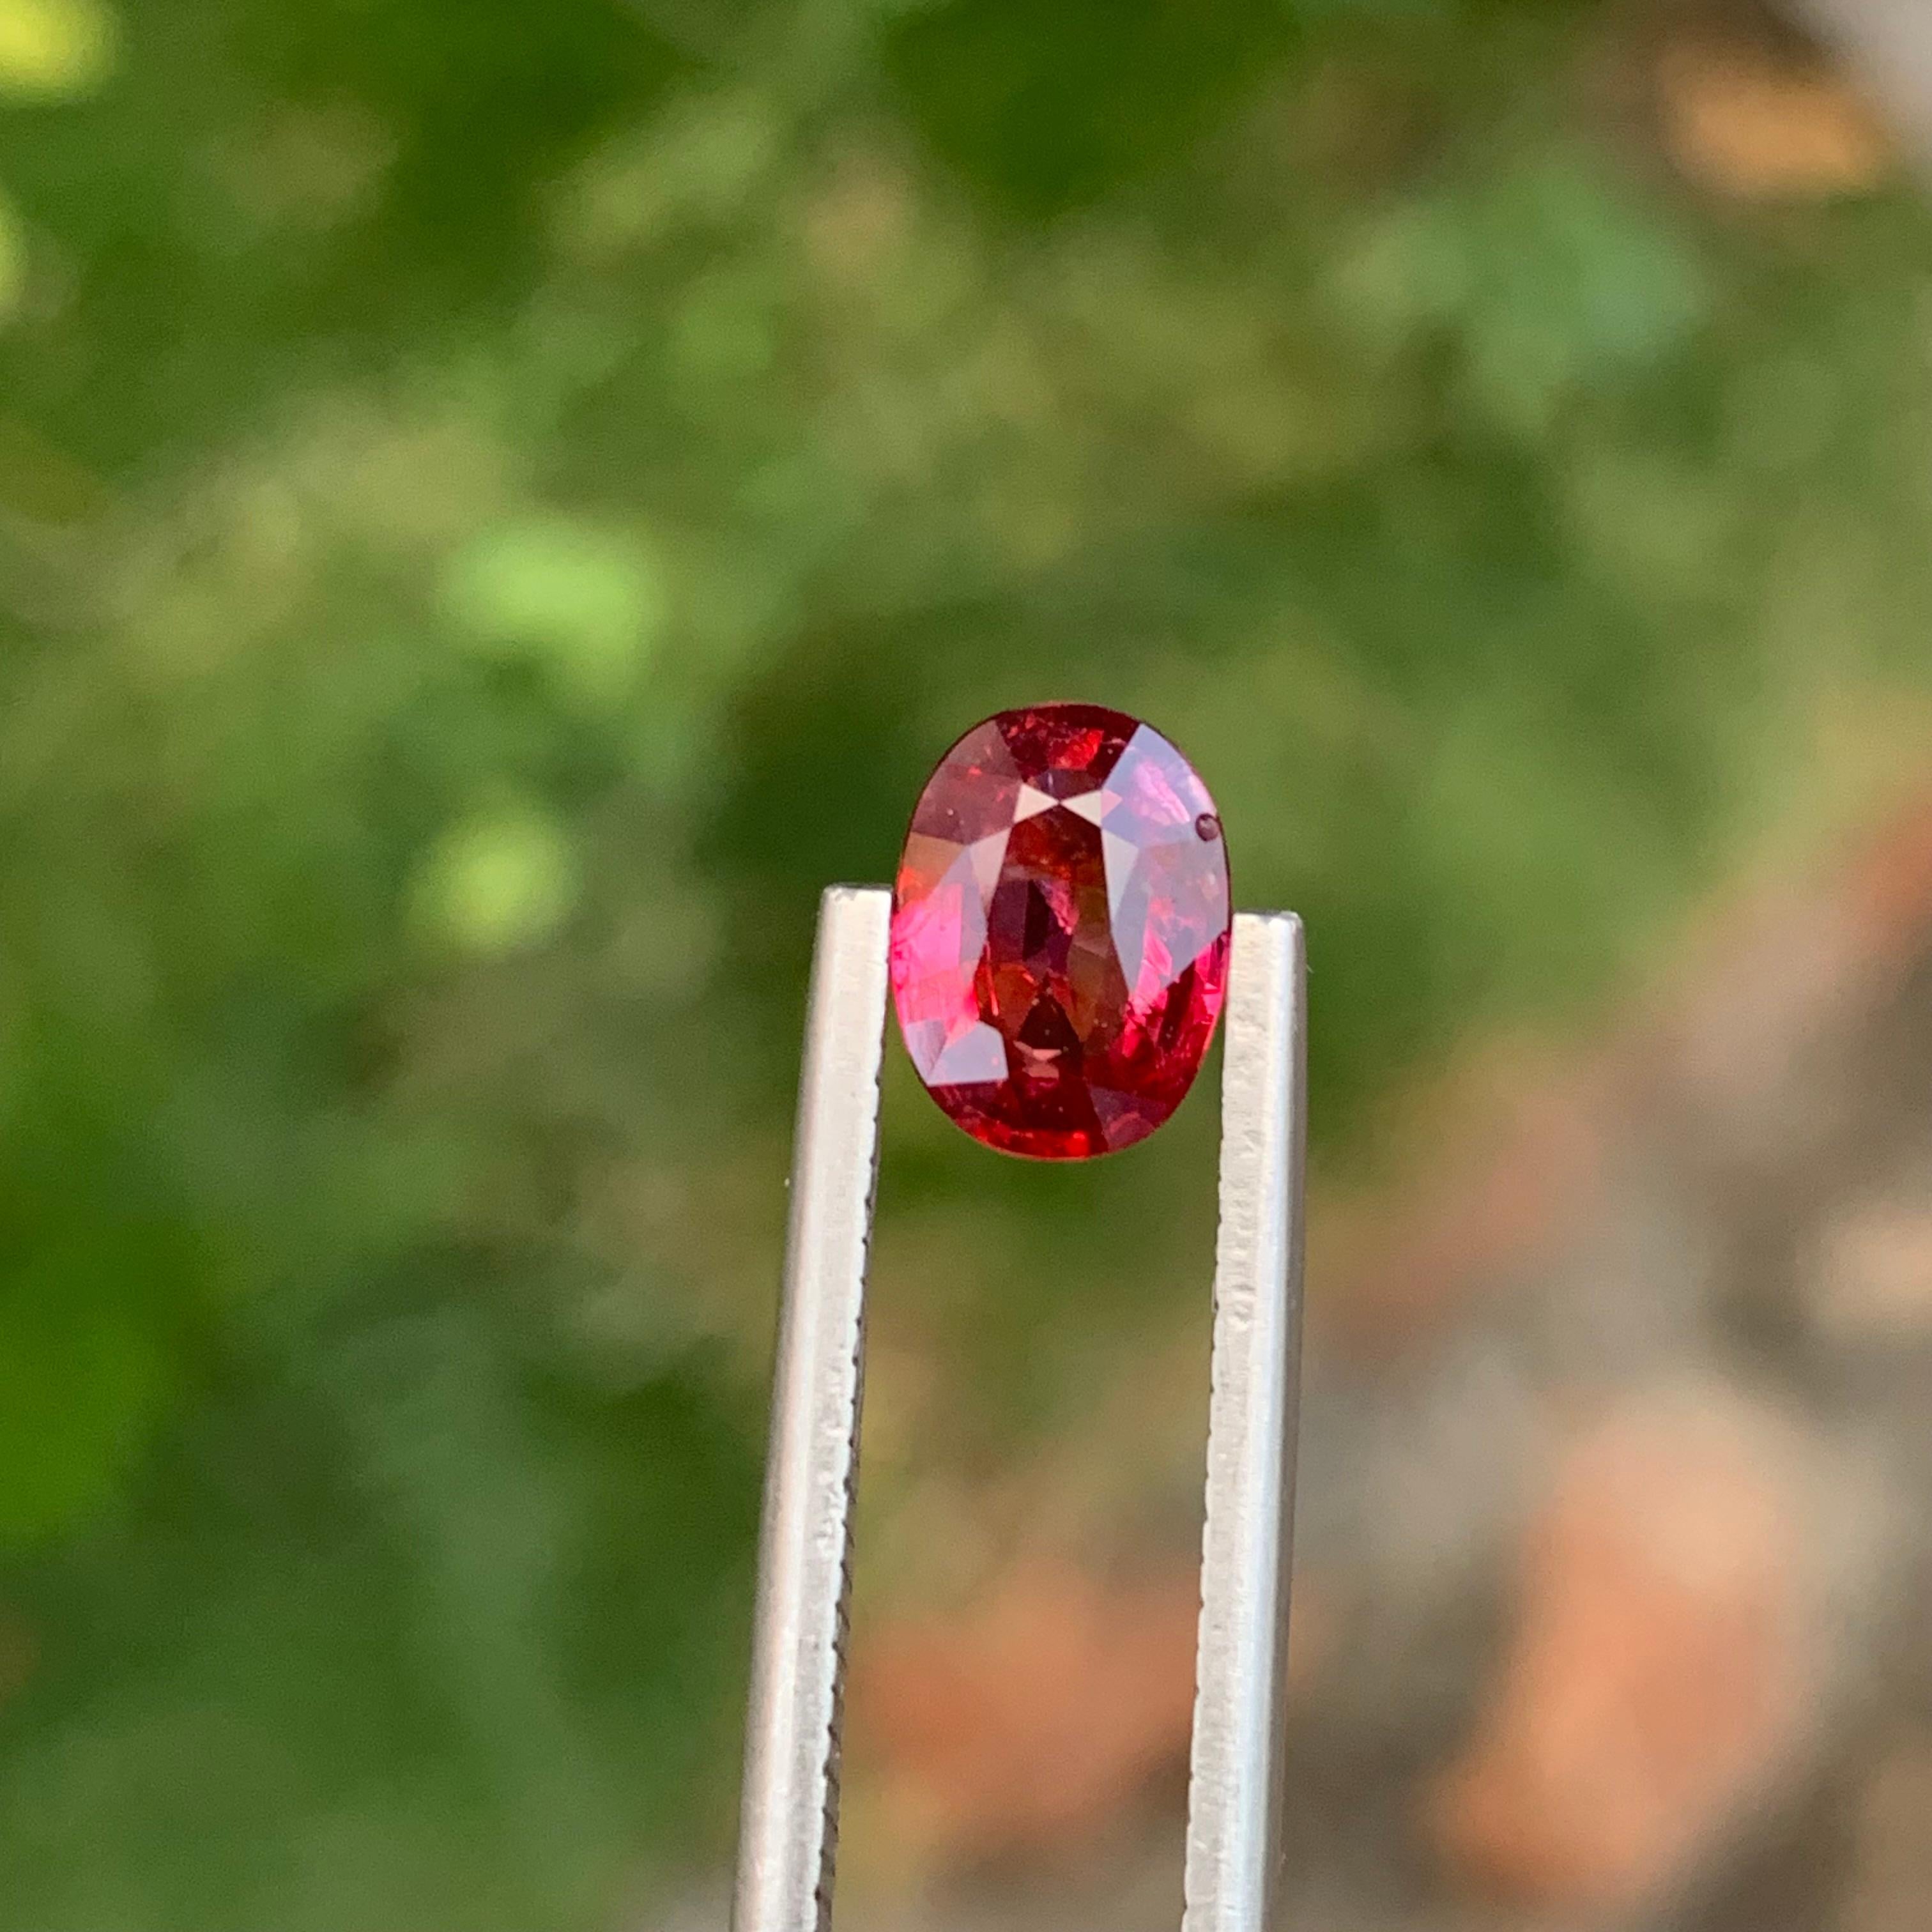 Certified Natural Loose 1.79 Carat Lustrous Ruby Oval Shape Gem From Africa  For Sale 4